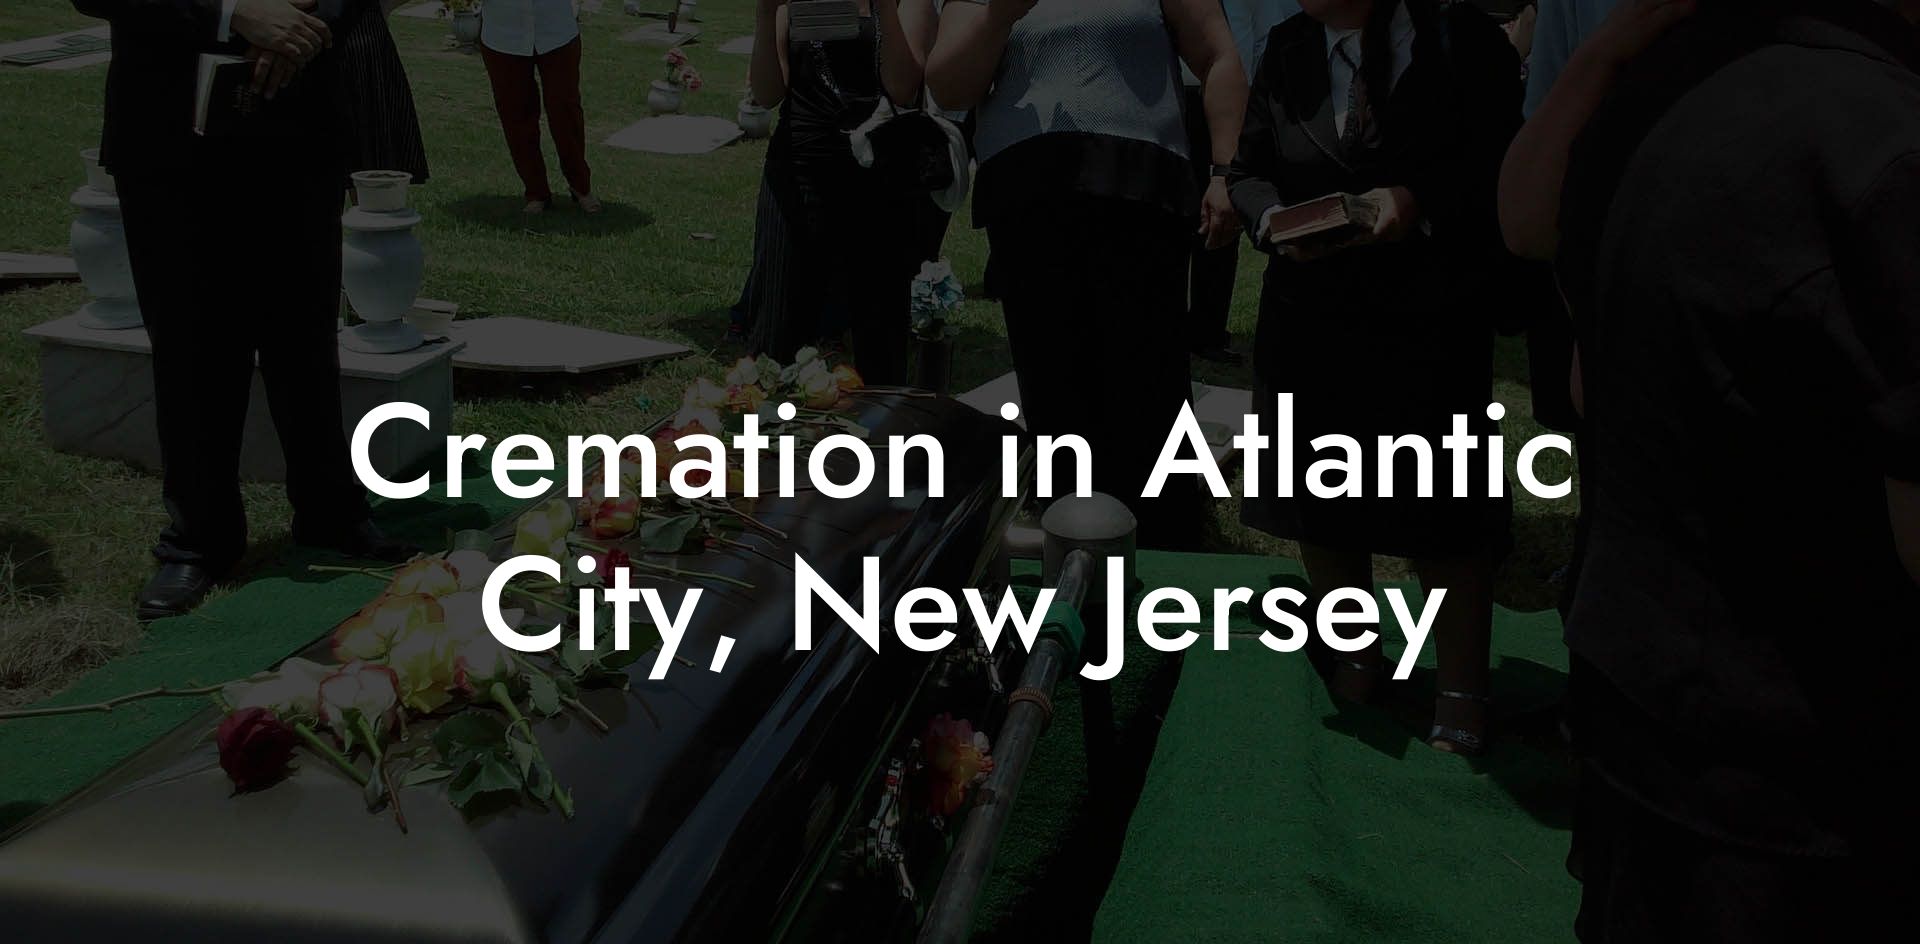 Cremation in Atlantic City, New Jersey